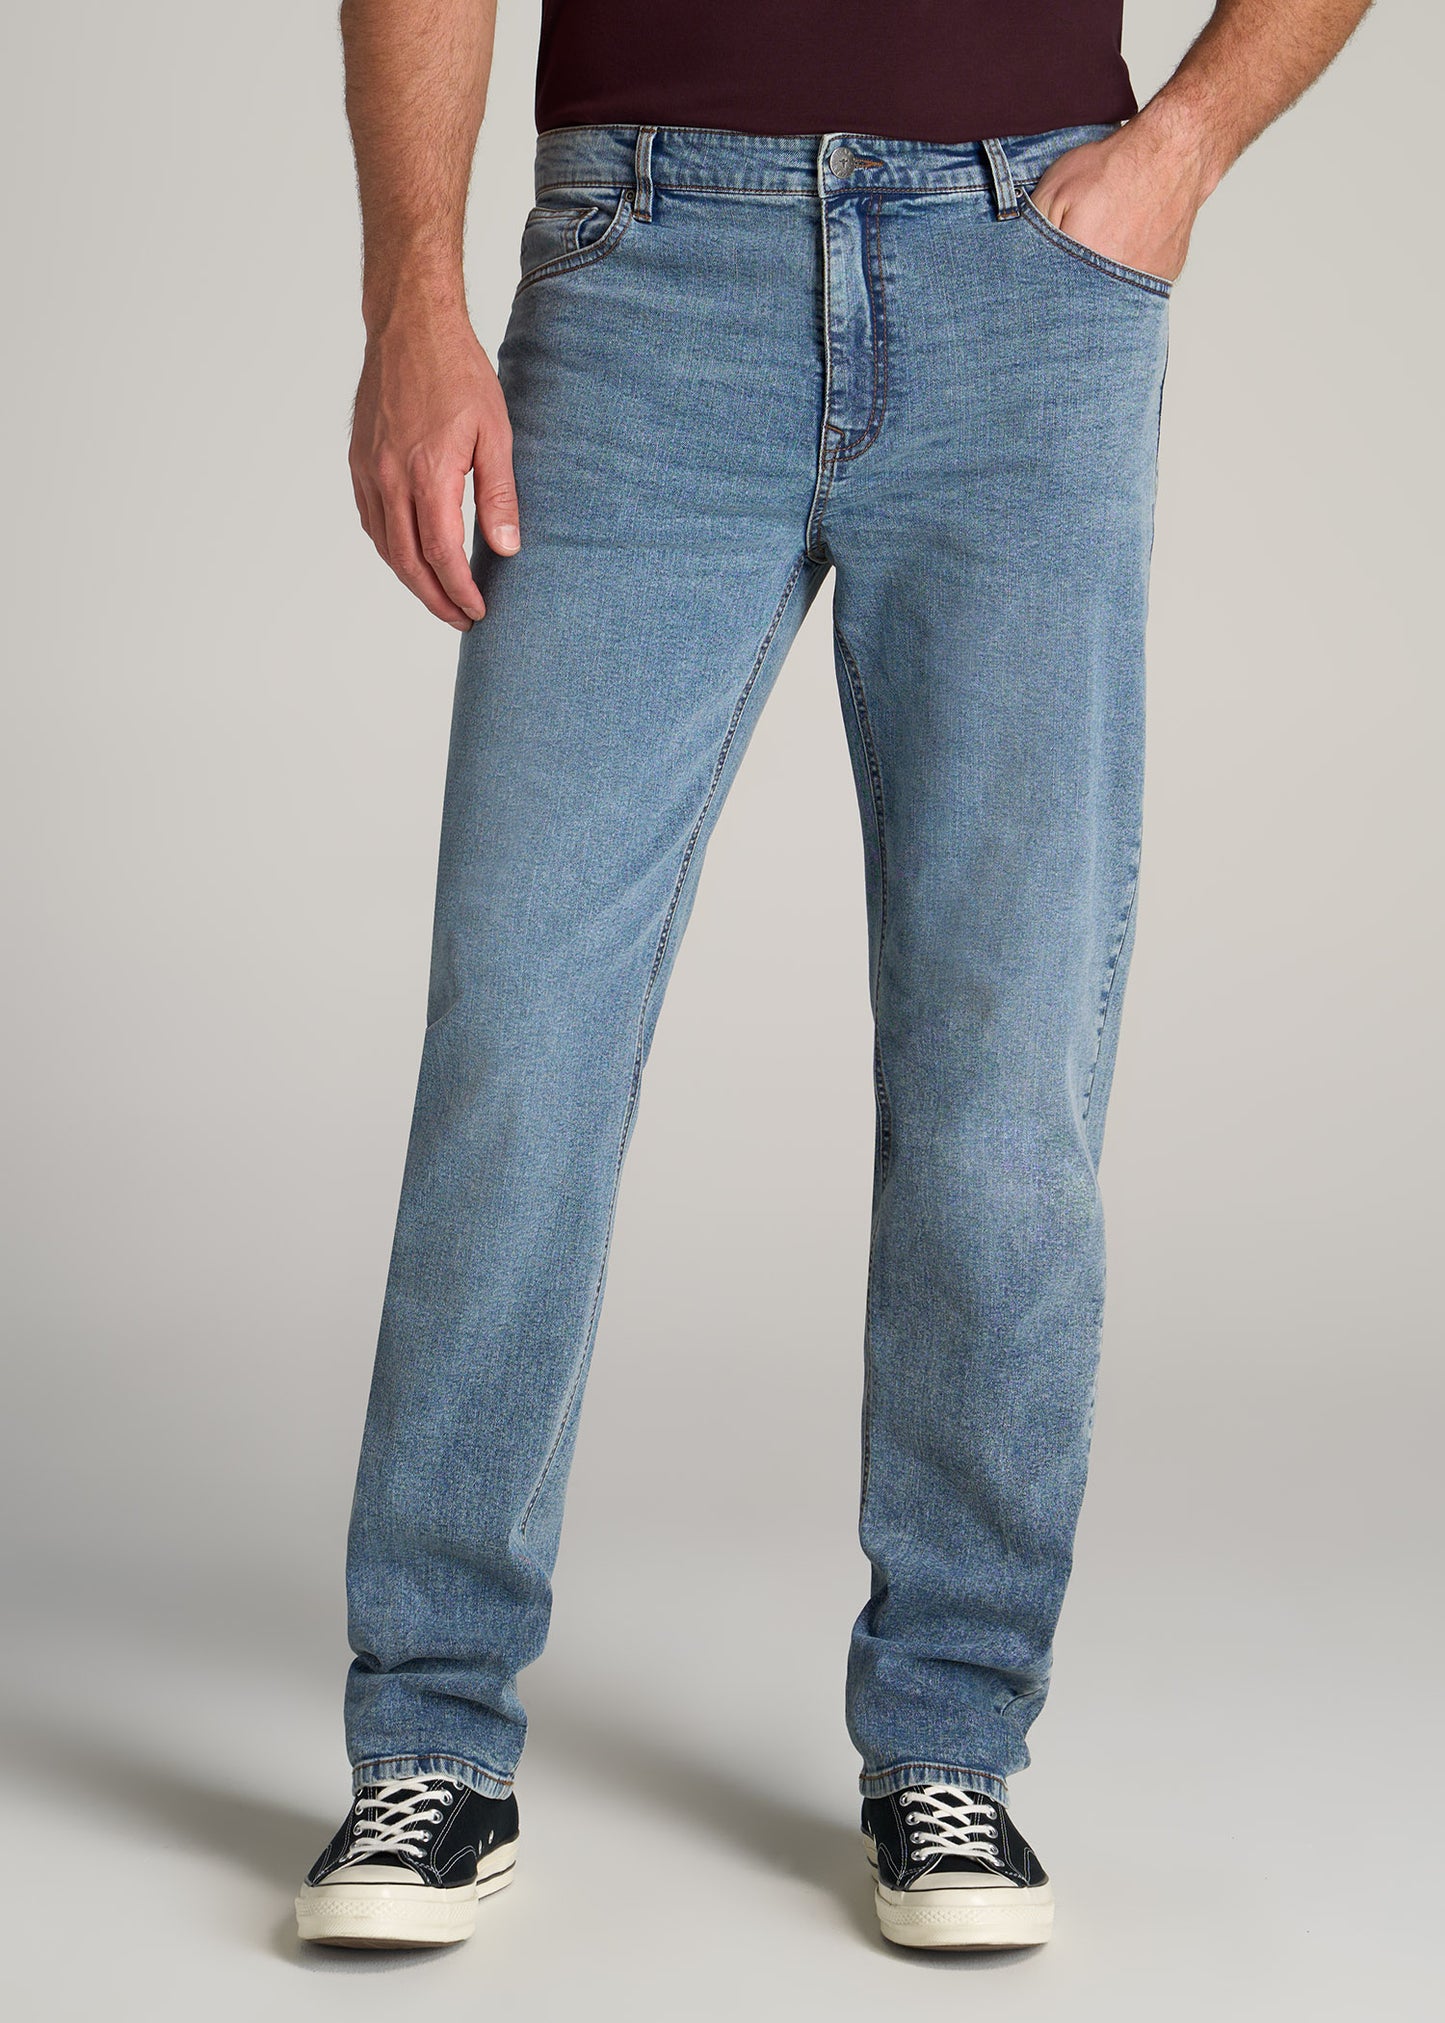 Tall man wearing J1 Straight Leg Jeans in Vintage Faded Blue by American Tall